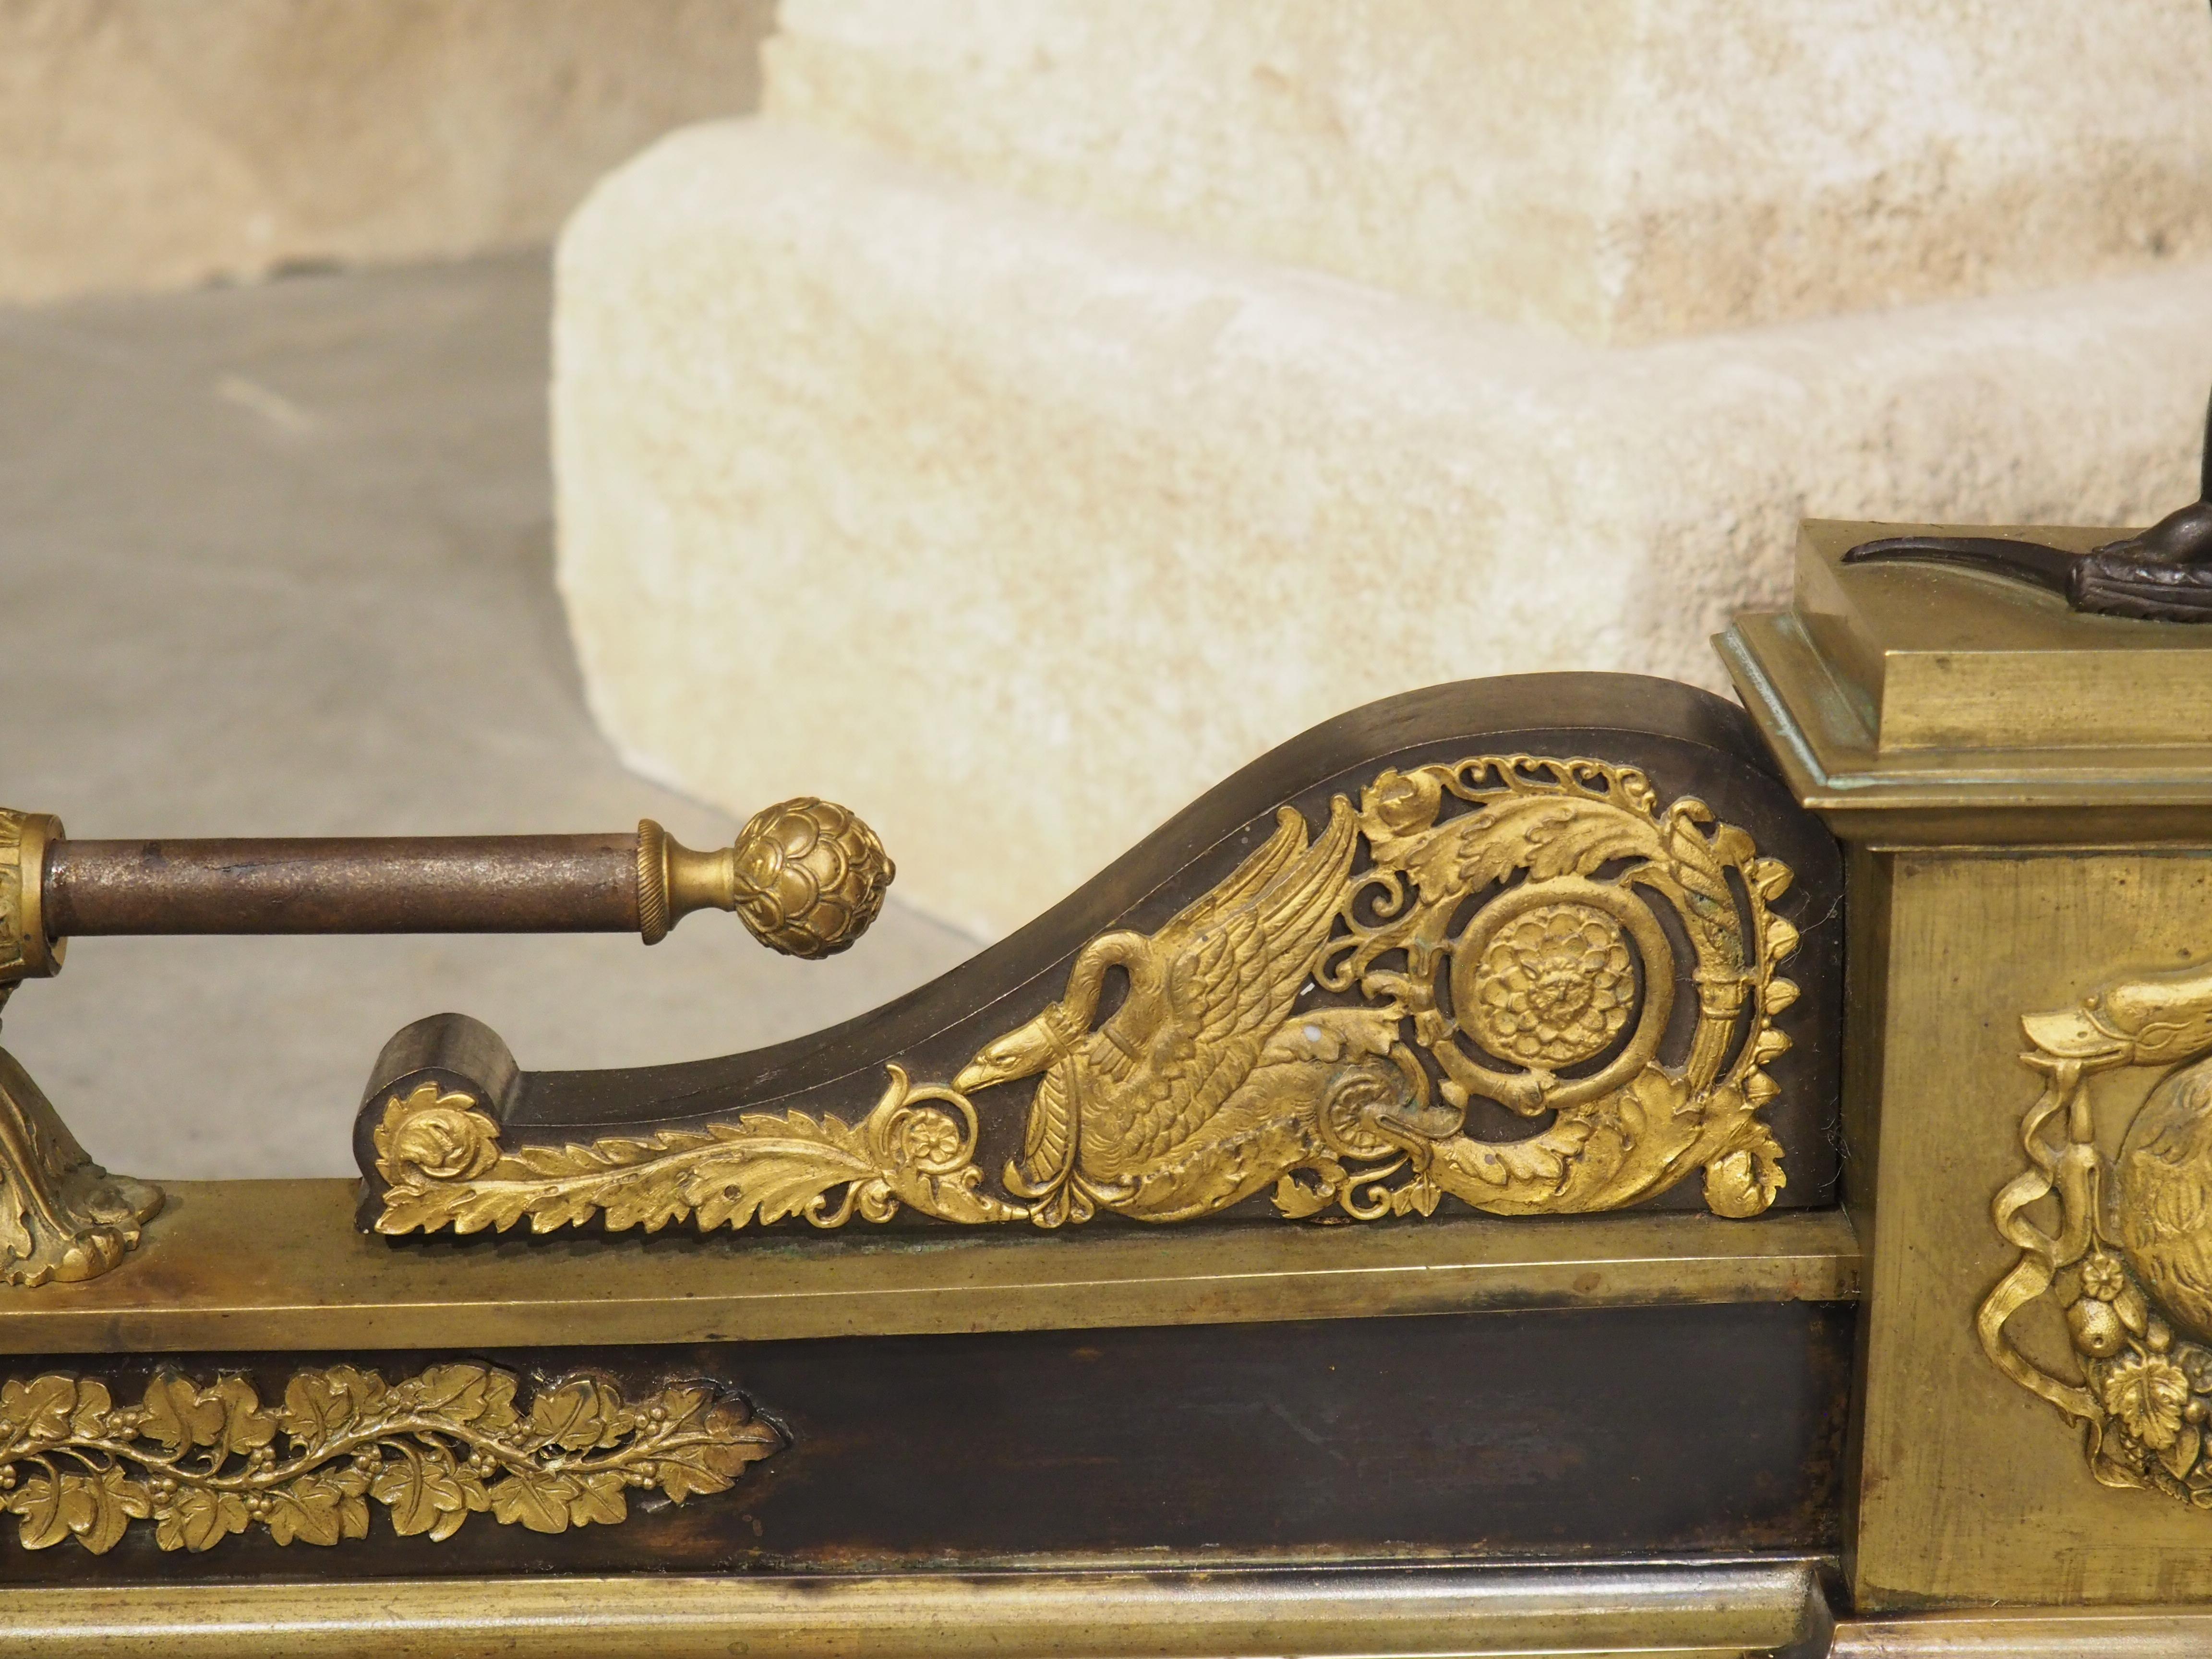 Period French Empire Patinated and Gilt Bronze Fireplace Fender, Circa 1815 For Sale 2